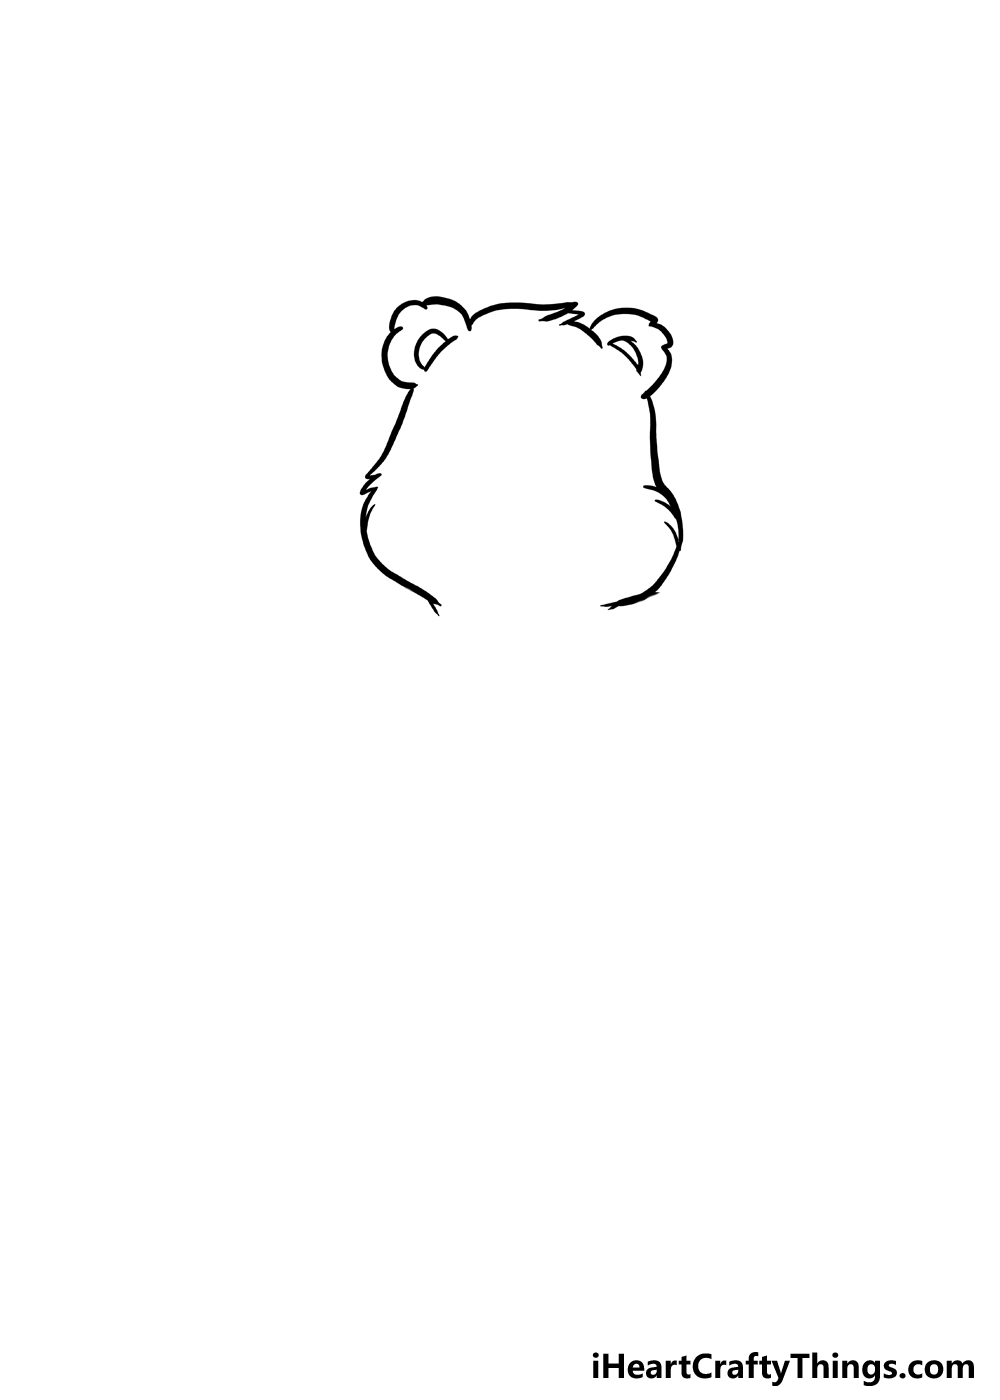 How to Draw A Care Bear step 1